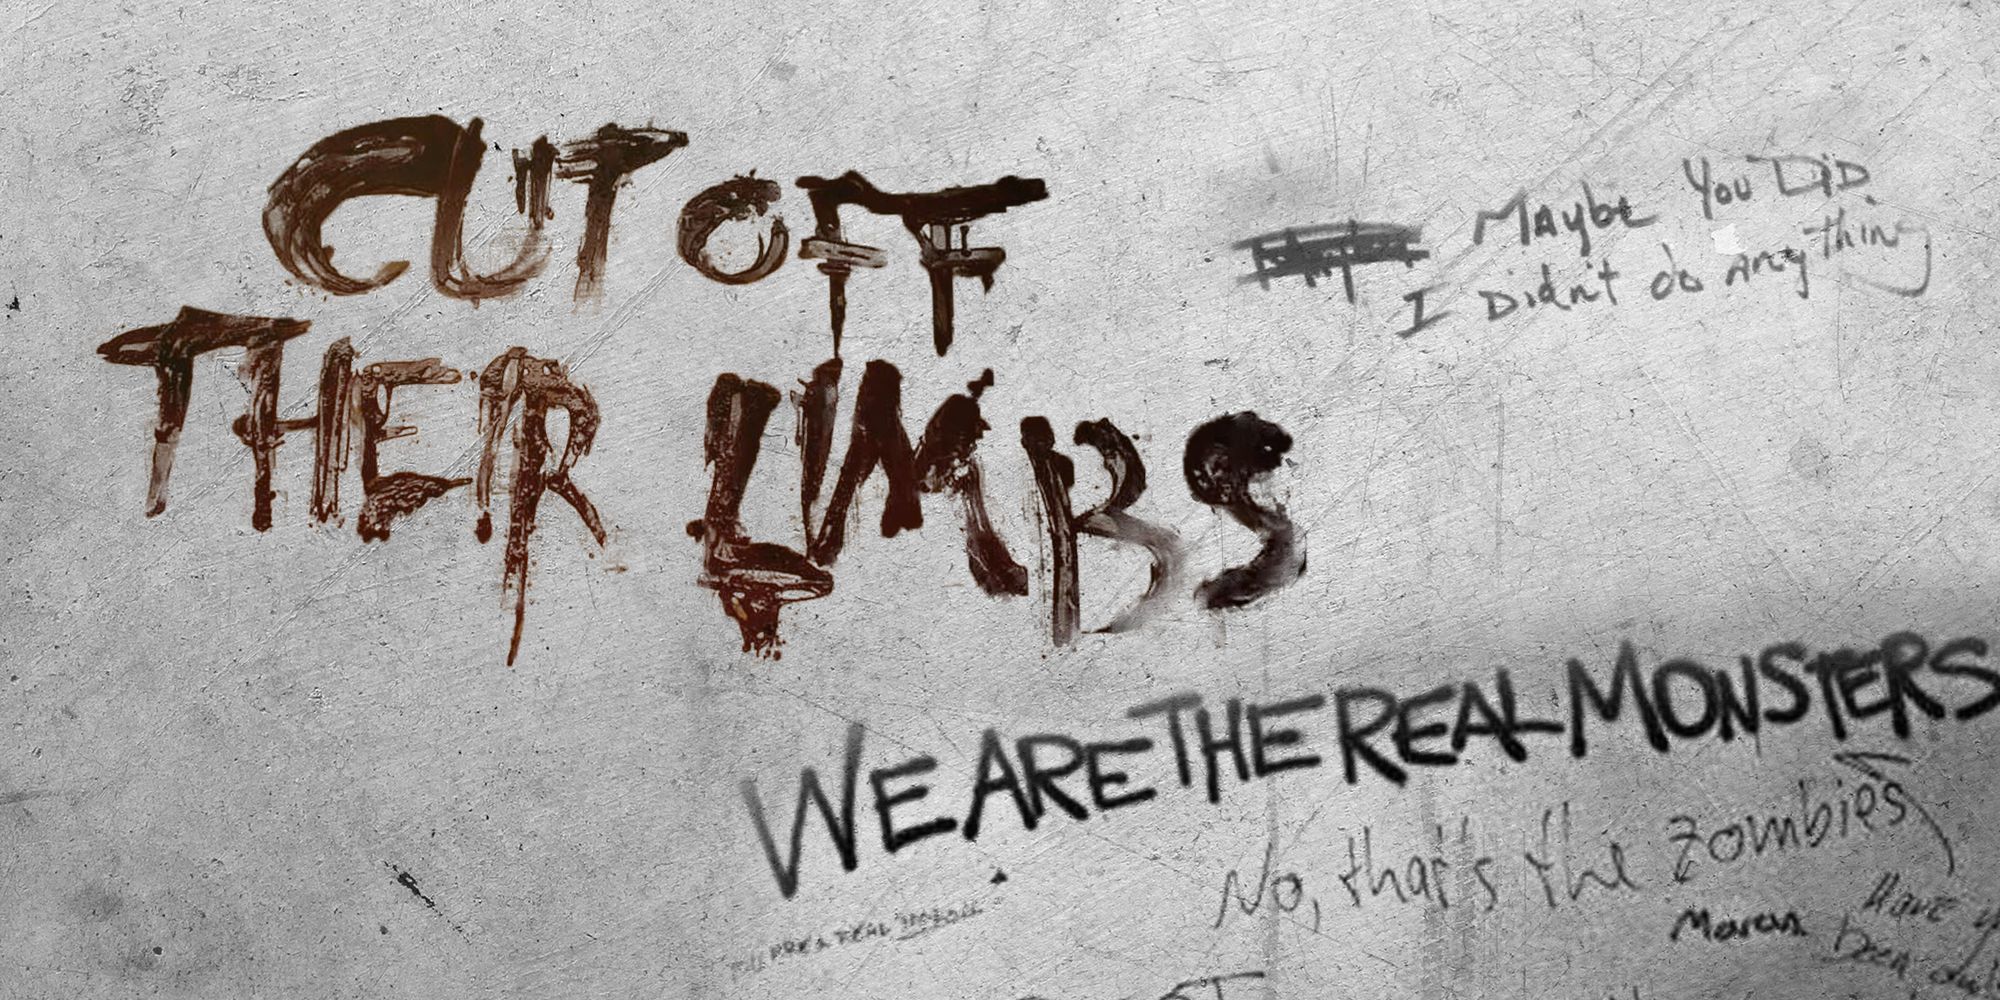 gaming graffiti, left 4 dead 'we are the real monsters' and dead space's 'cut off their limbs'